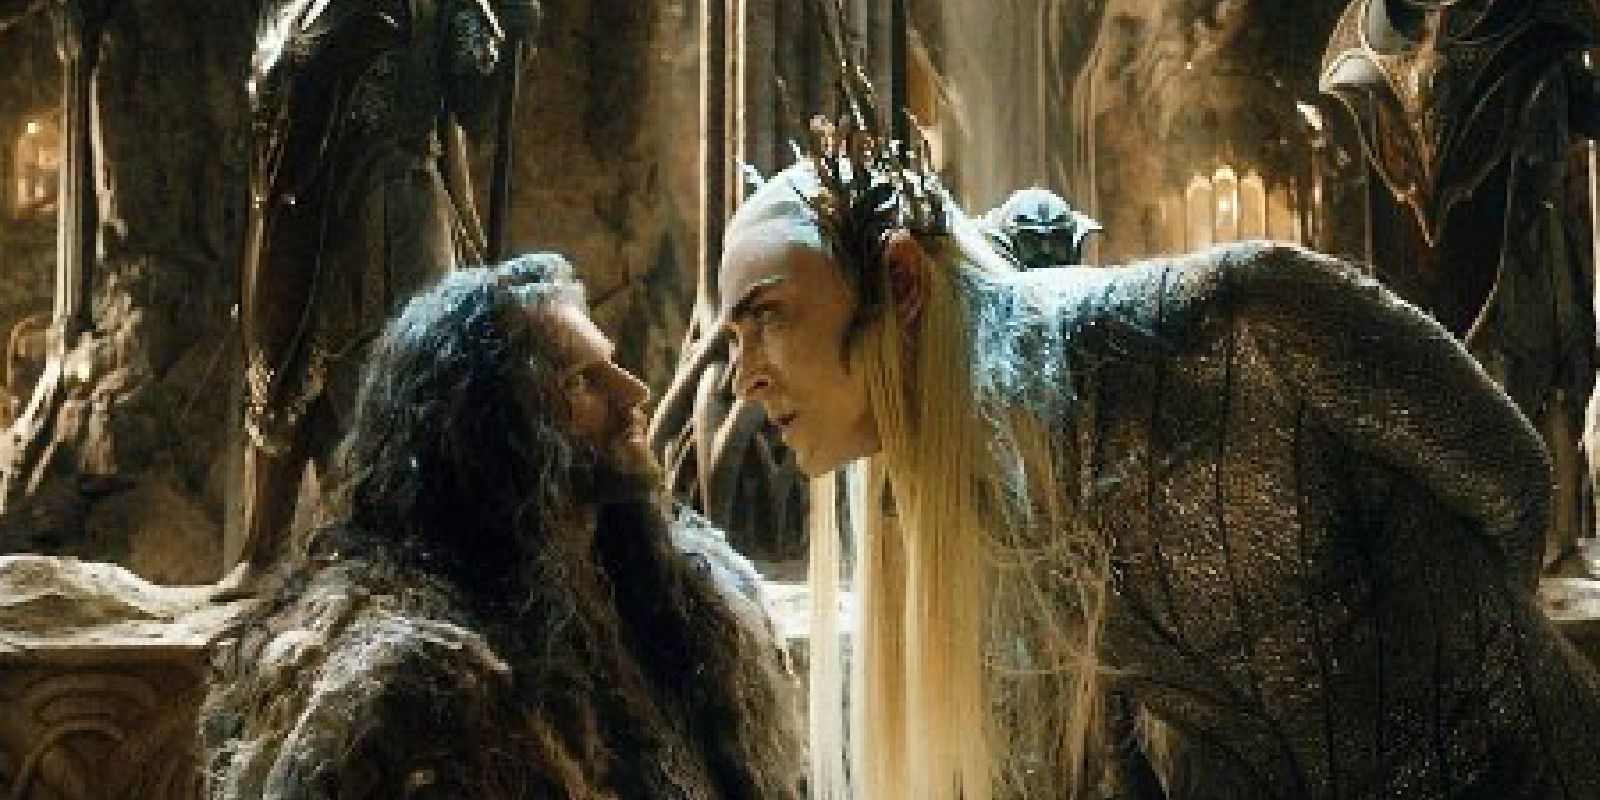 Thranduil leans down angrily into Thorin's face in The Hobbit.